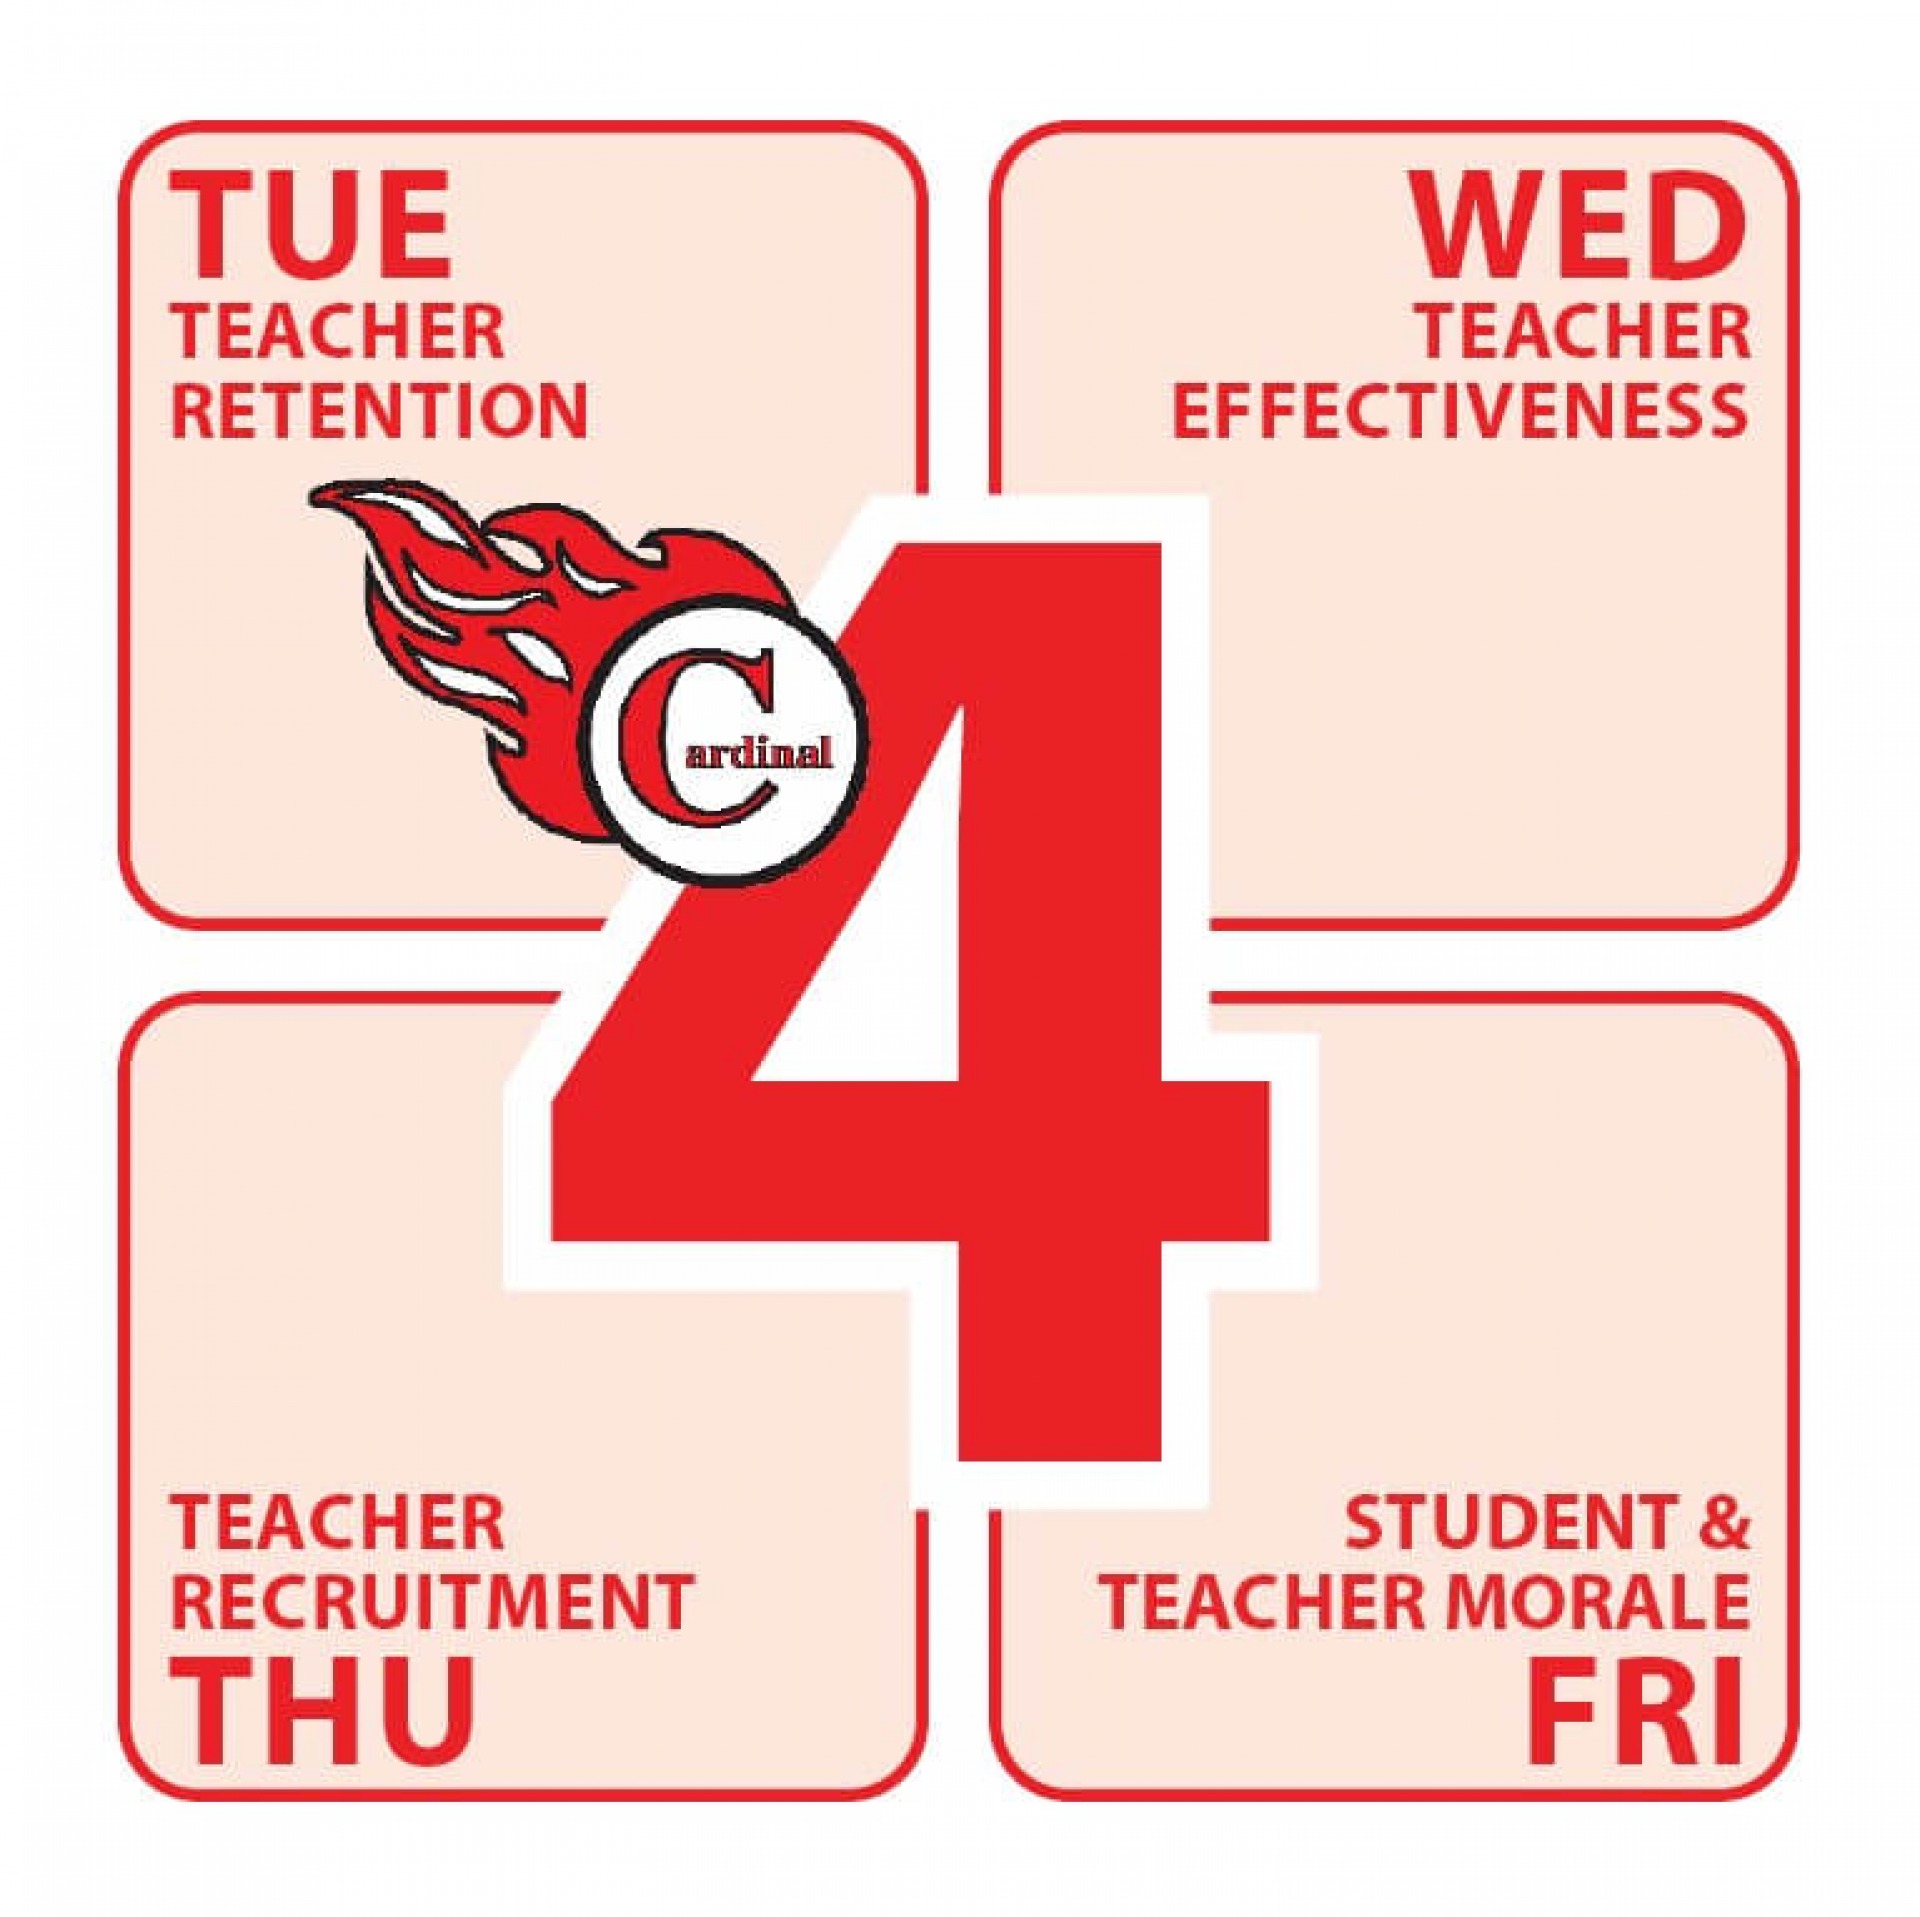 4-day school week graphic showing Tuesday to Friday schedule and its benefits.